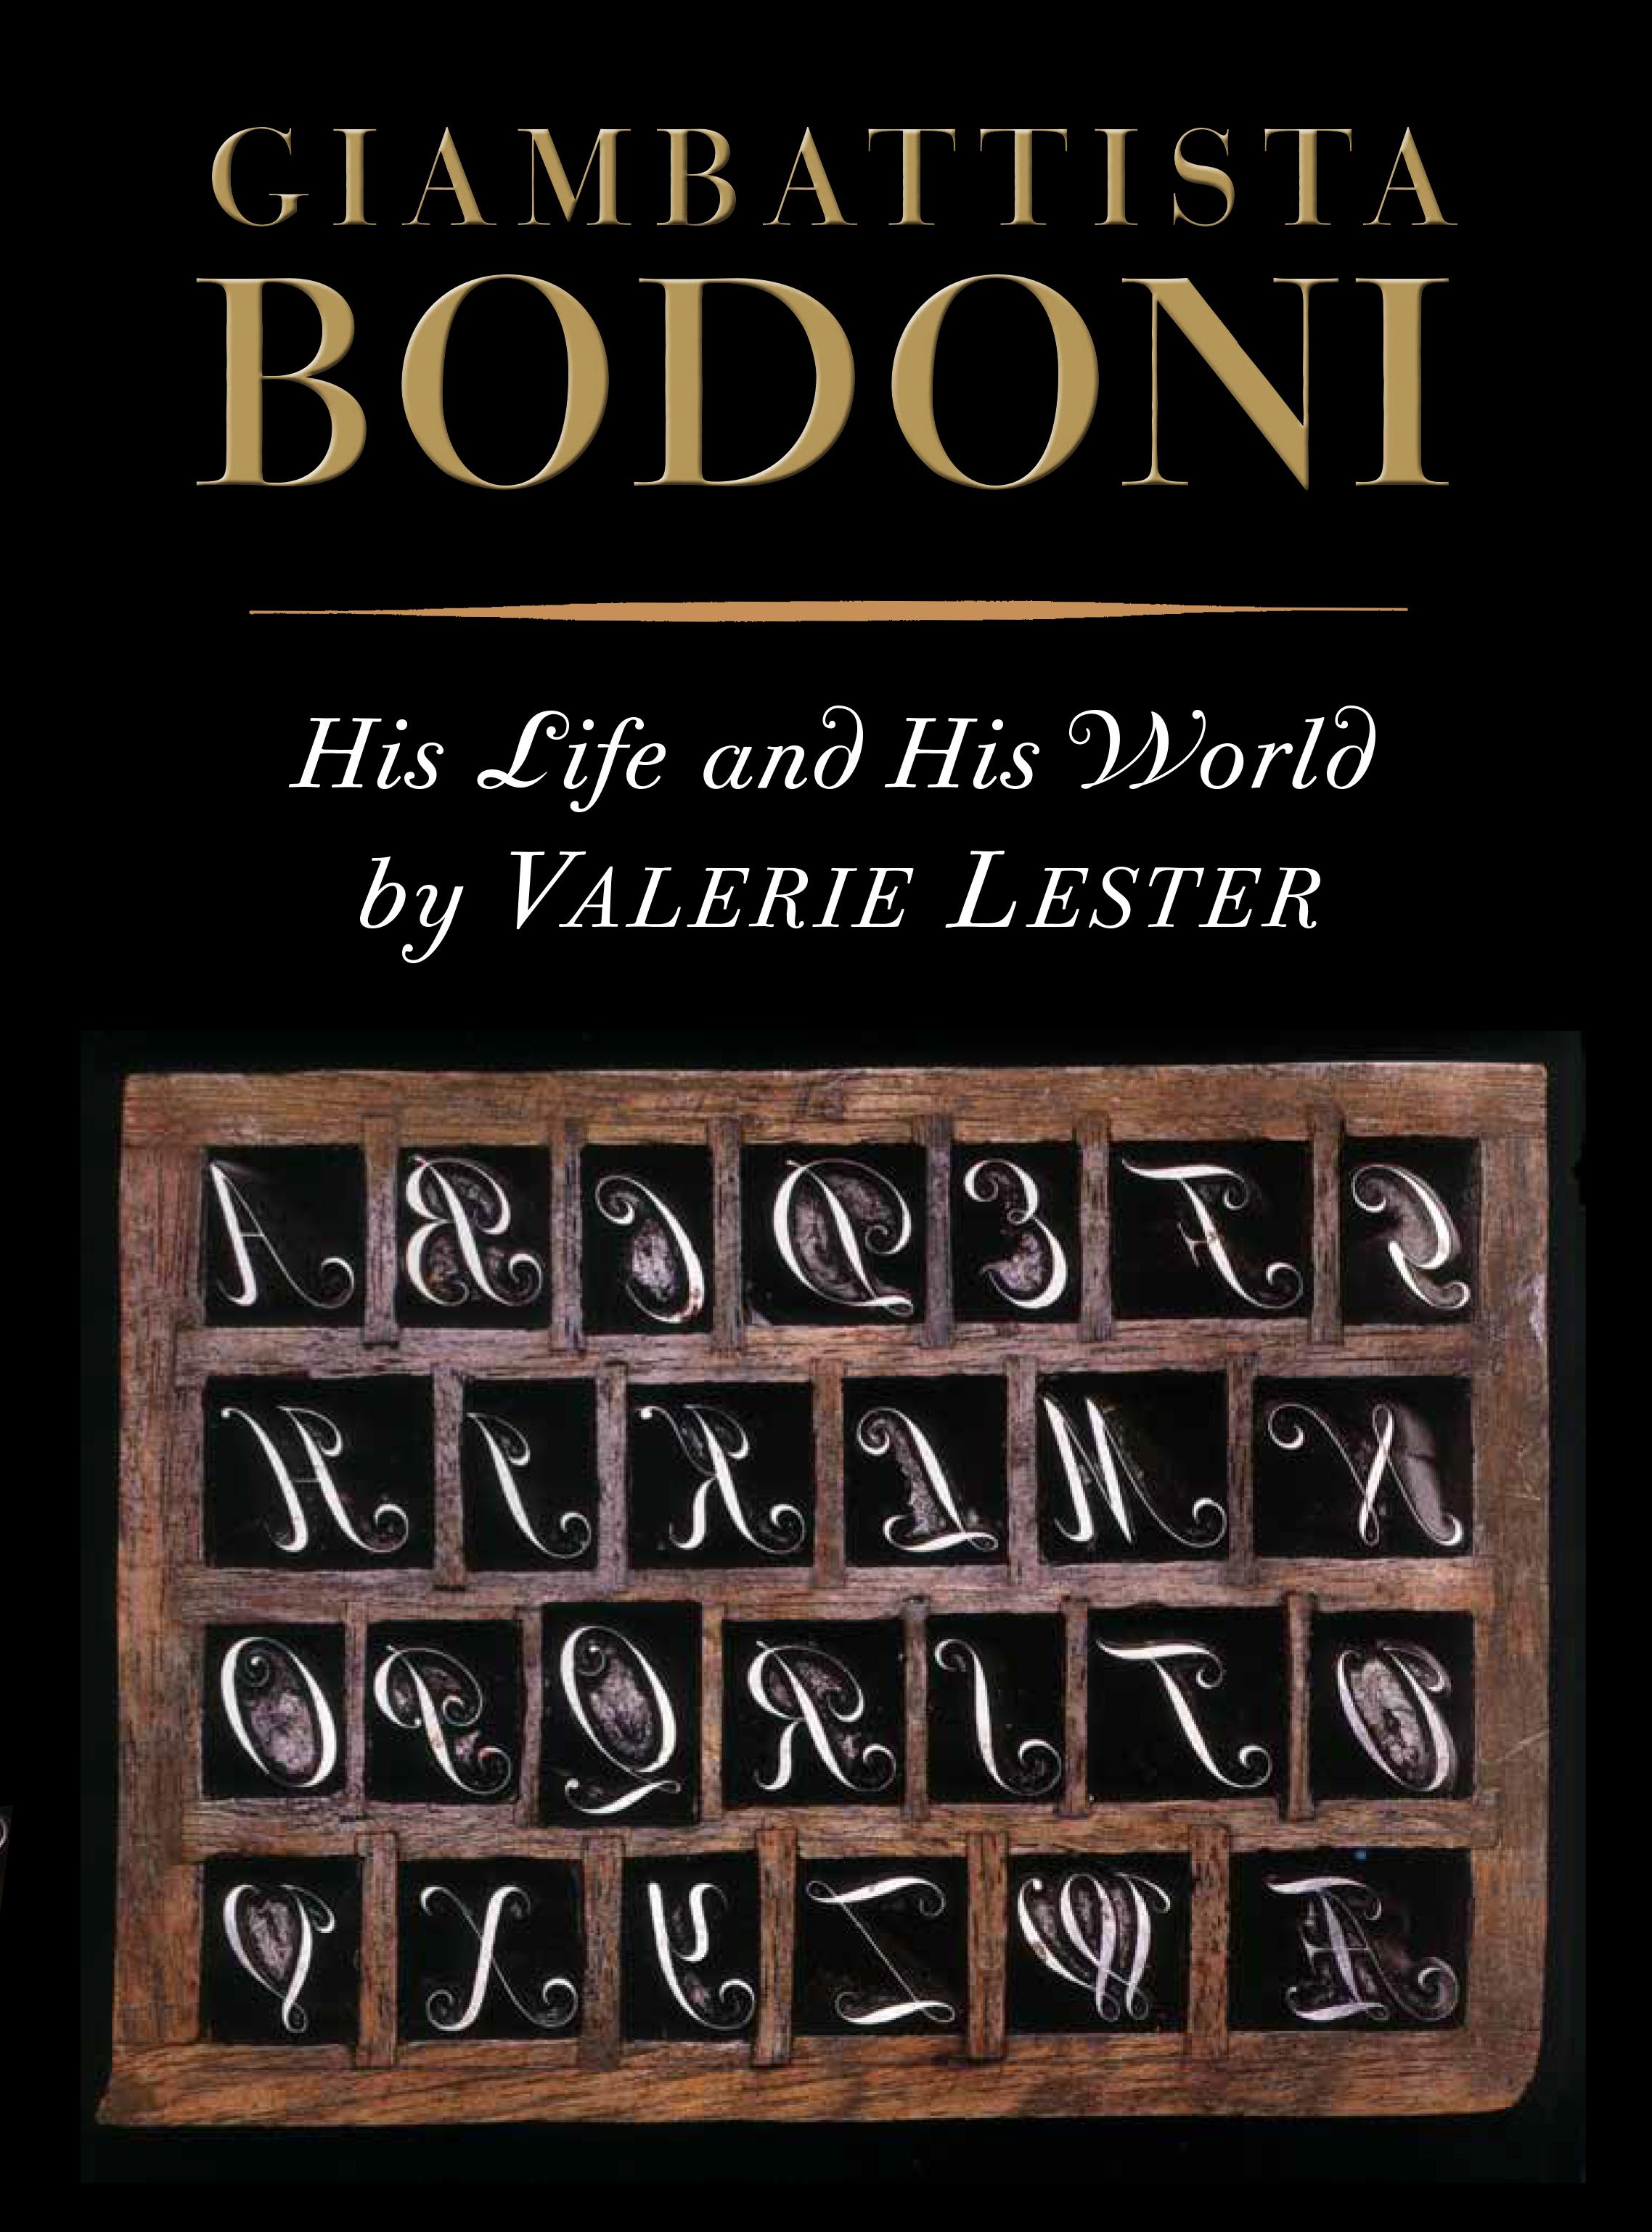 Giambattista Bodoni: His Life and His World by Valerie Lester